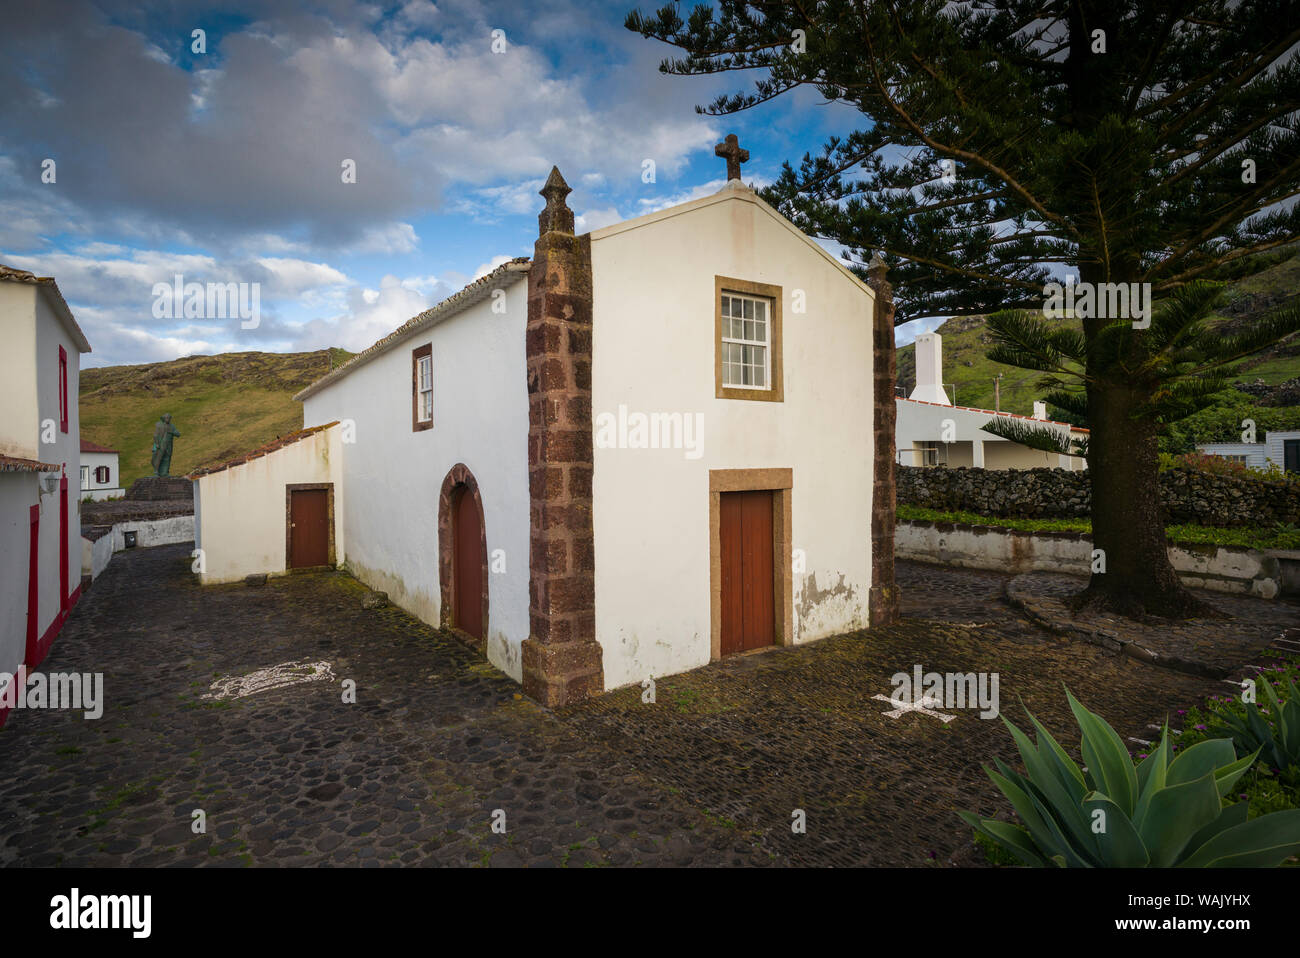 Portugal, Azores, Santa Maria Island, Anjos. Place where Christopher Columbus made landfall after discovering the New World, Igreja Nossa Senhora dos Anjos, first church in the Azores, 15th century Stock Photo